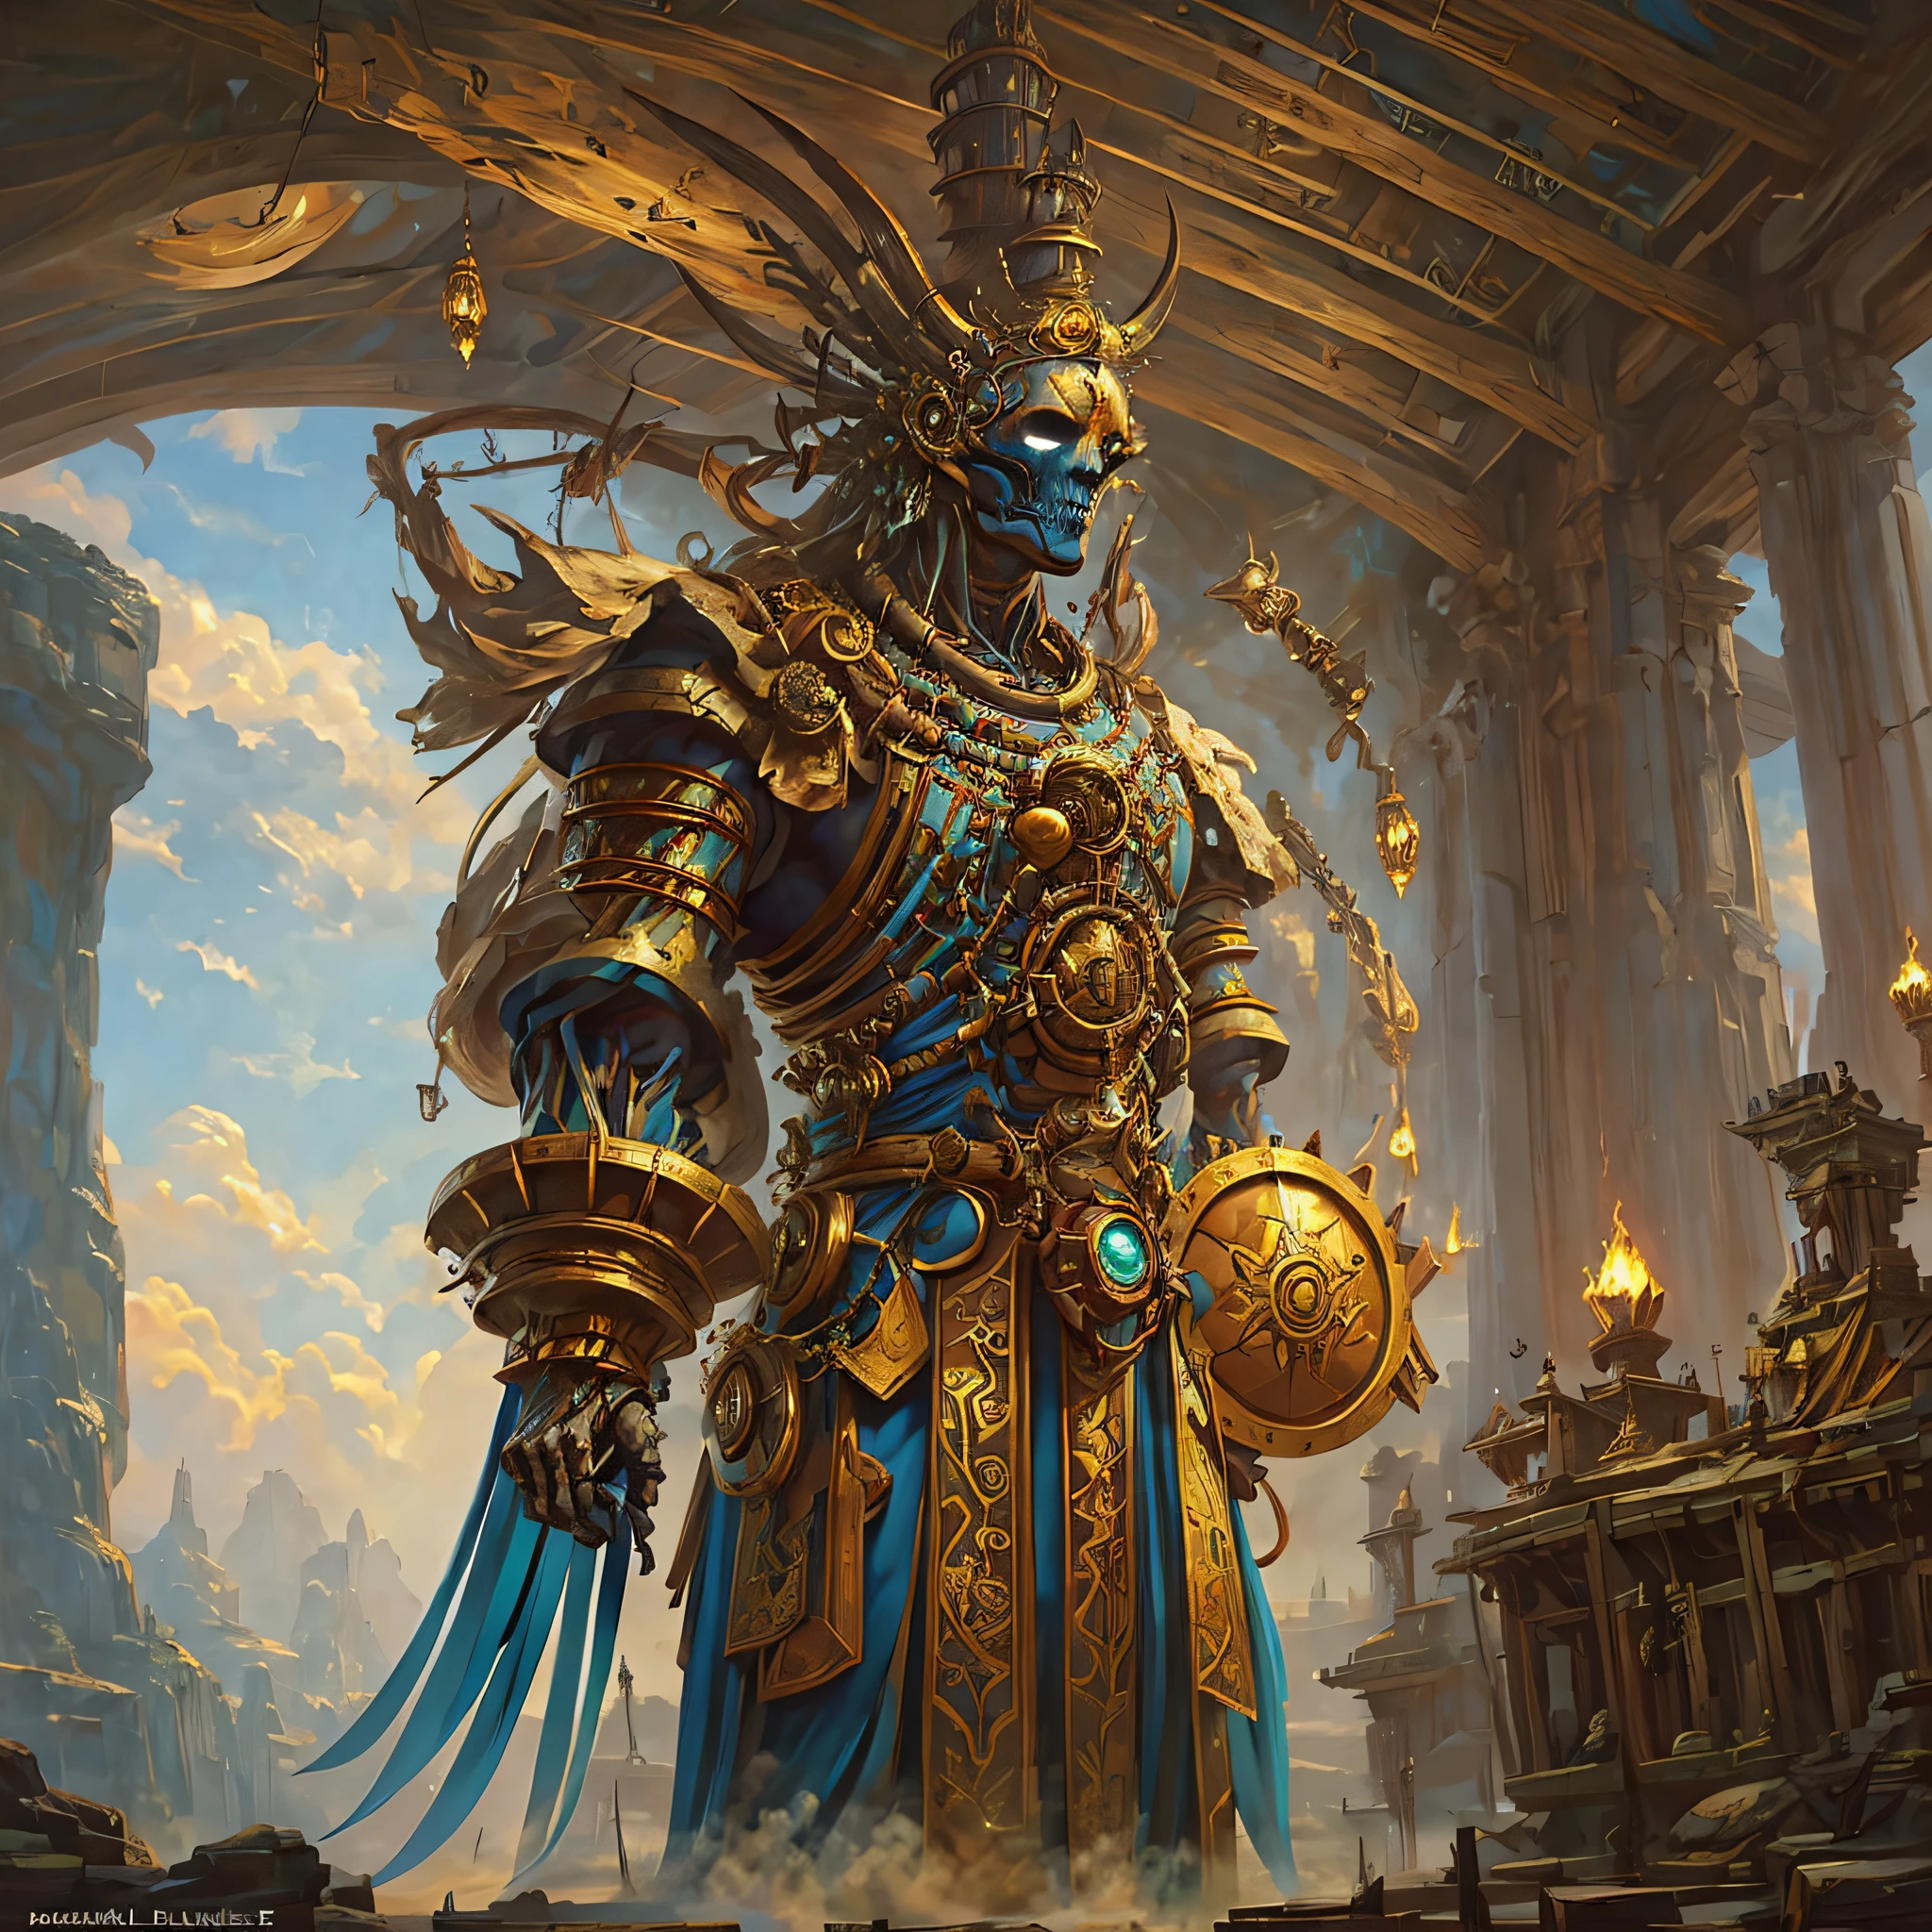 there is a man in a costume standing in a building, kaladesh concept art. mechanical, magic the gathering card art, magic the gathering art, magic : the gathering art, magic the gathering concept art, collectible card art, mtg art, kaladesh, full art, an epic majestical degen trader, fantasy card game art, magic the gathering artwork，Cyberpunk mechanical skeleton shamans wield king drums and whips stand above the wasteland of various prayer flags and dragon da --auto --s2